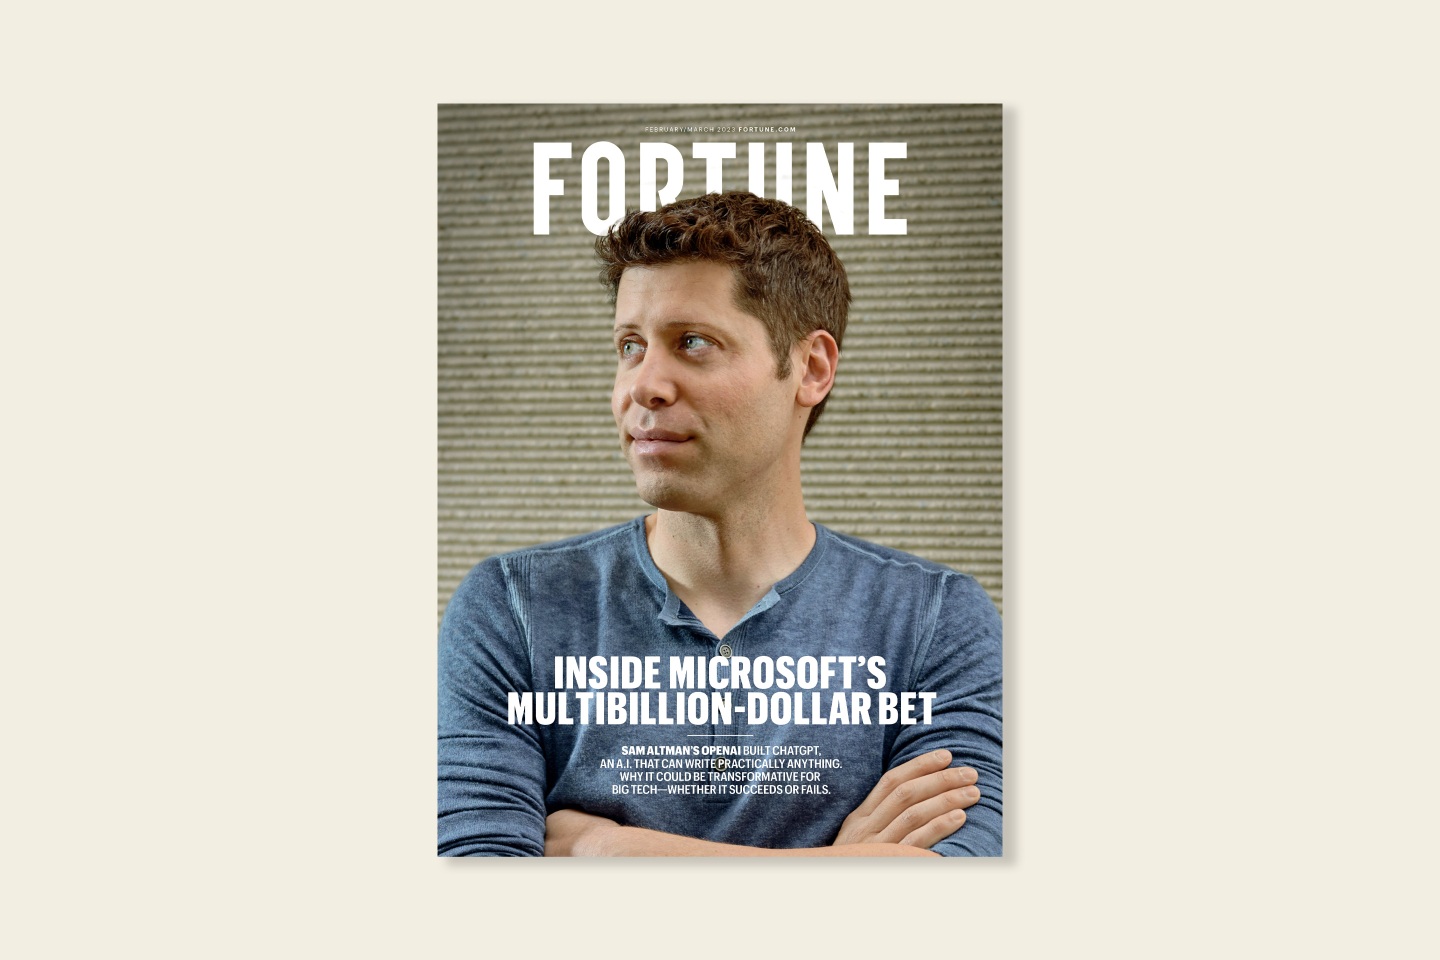 Fortune's February/March 2023 issue with OpenAI CEO Sam Altman on the cover.